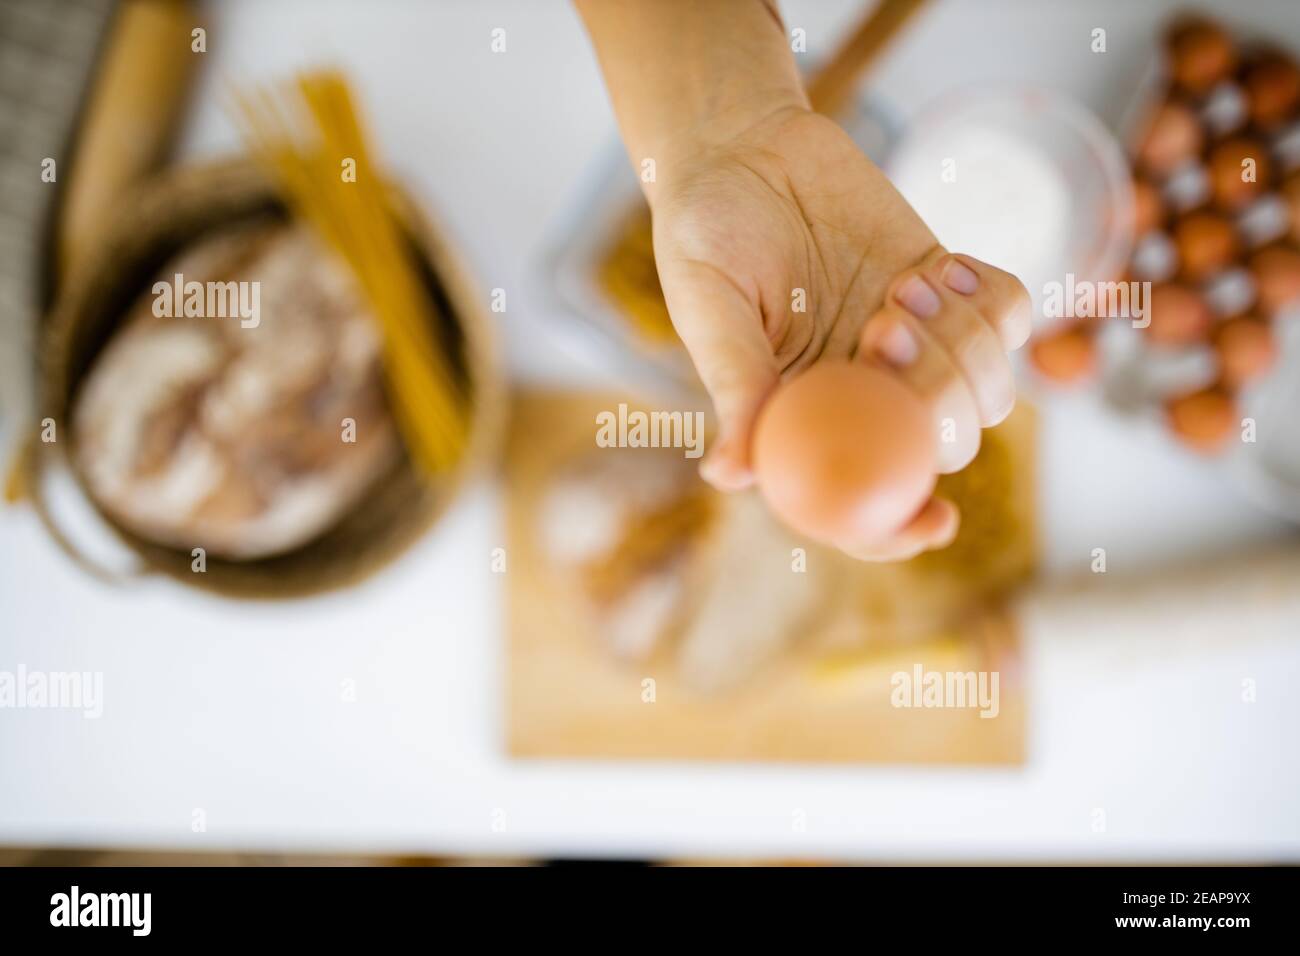 Female hand holding an egg above ingredients on a table Stock Photo